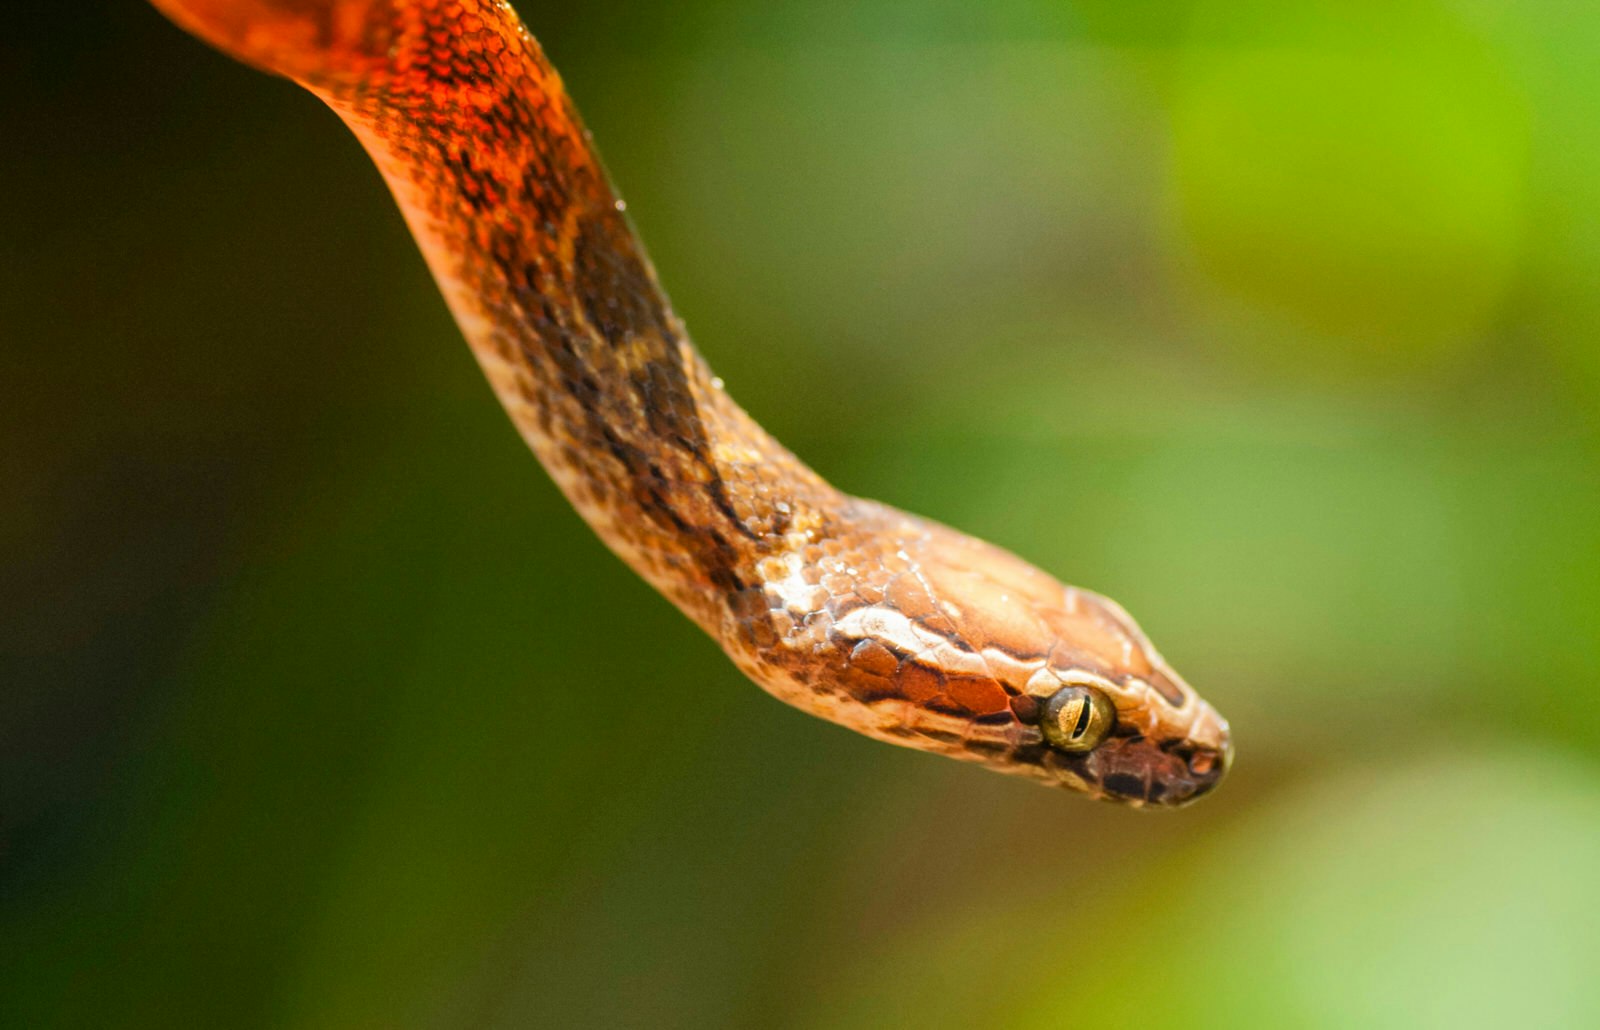 The head and section of body from a reddish-brown snake hang seemingly in space with a blurred green background © Justin Foulkes / Lonely Planet